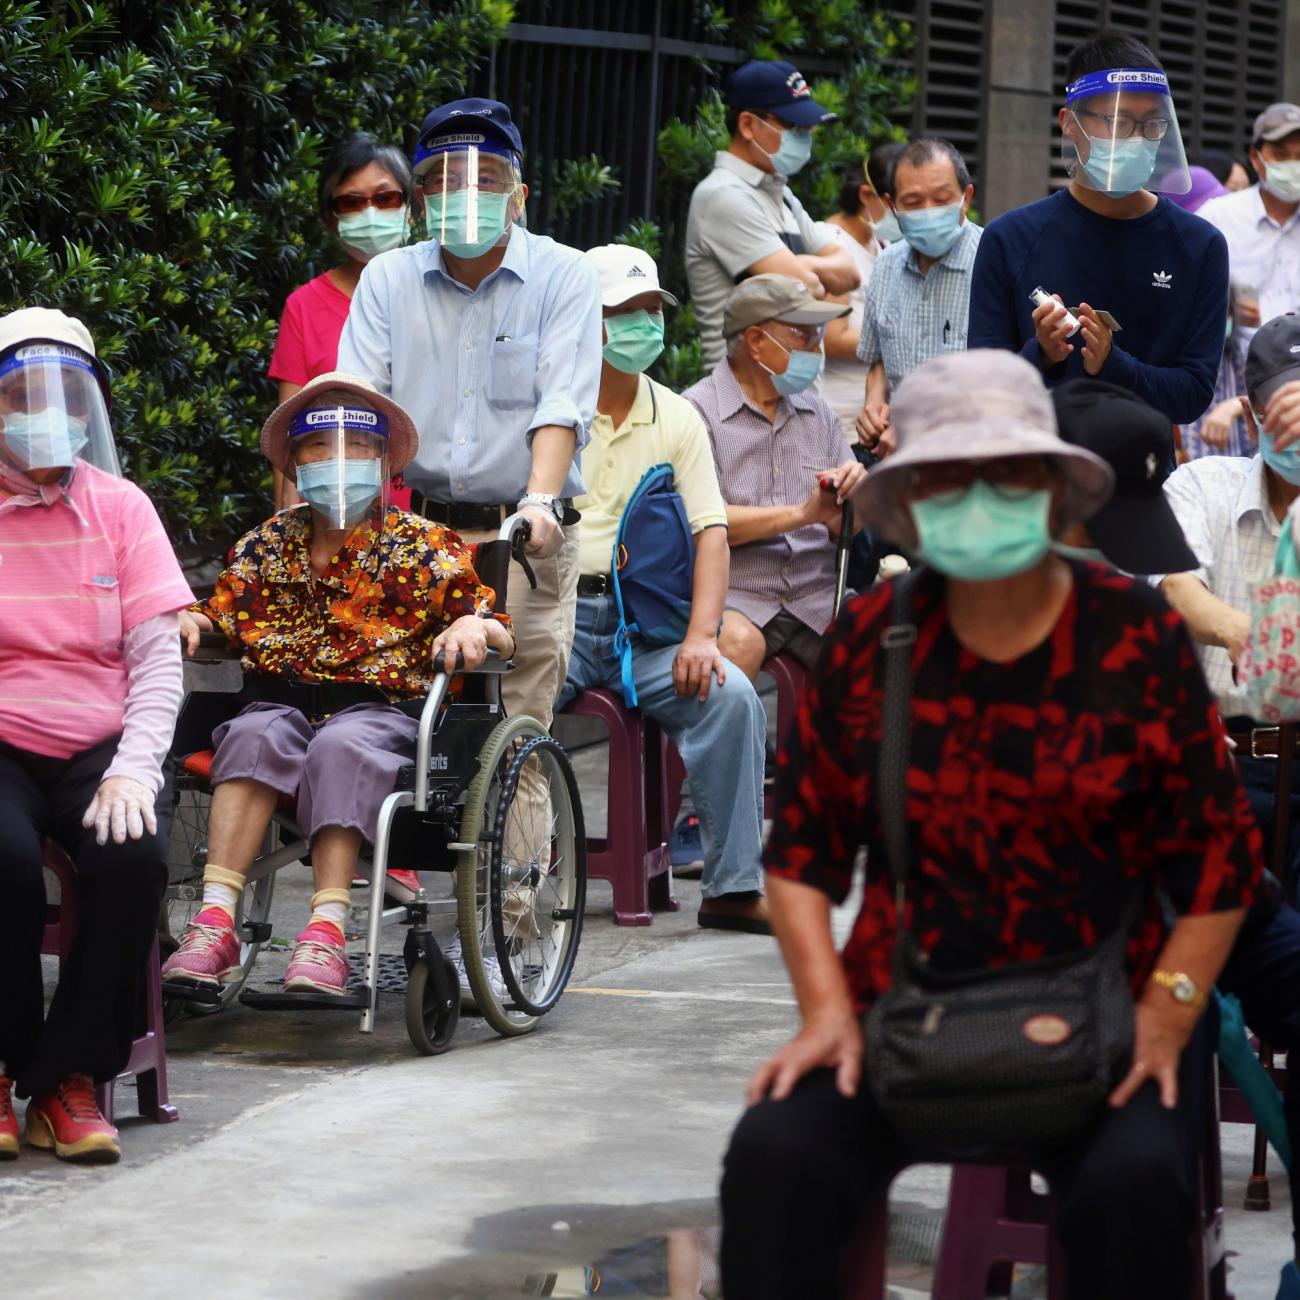 Older people in wheelchairs and blue masks line up to receive the vaccine against the COVID-19 during a vaccination session for elderly people over 85 years old, at a church in Taipei, Taiwan on June 15, 2021.